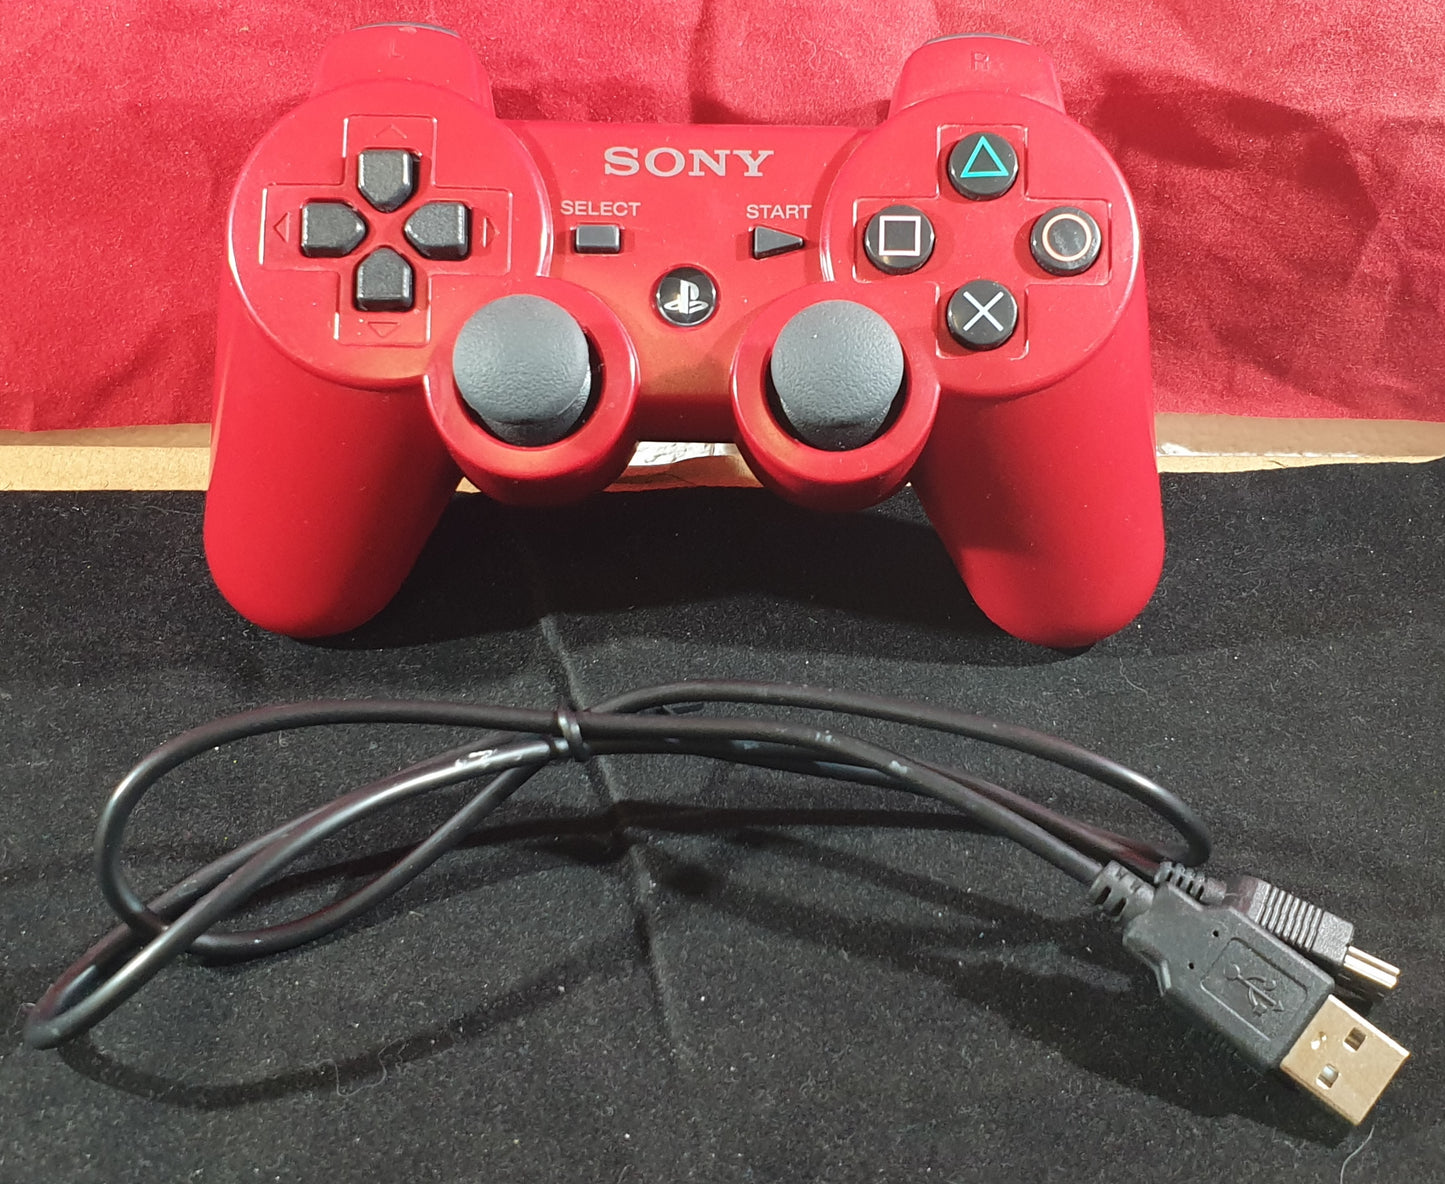 Official Red Sony Playstation 3 (PS3) Controller with Charging Cable Accessory